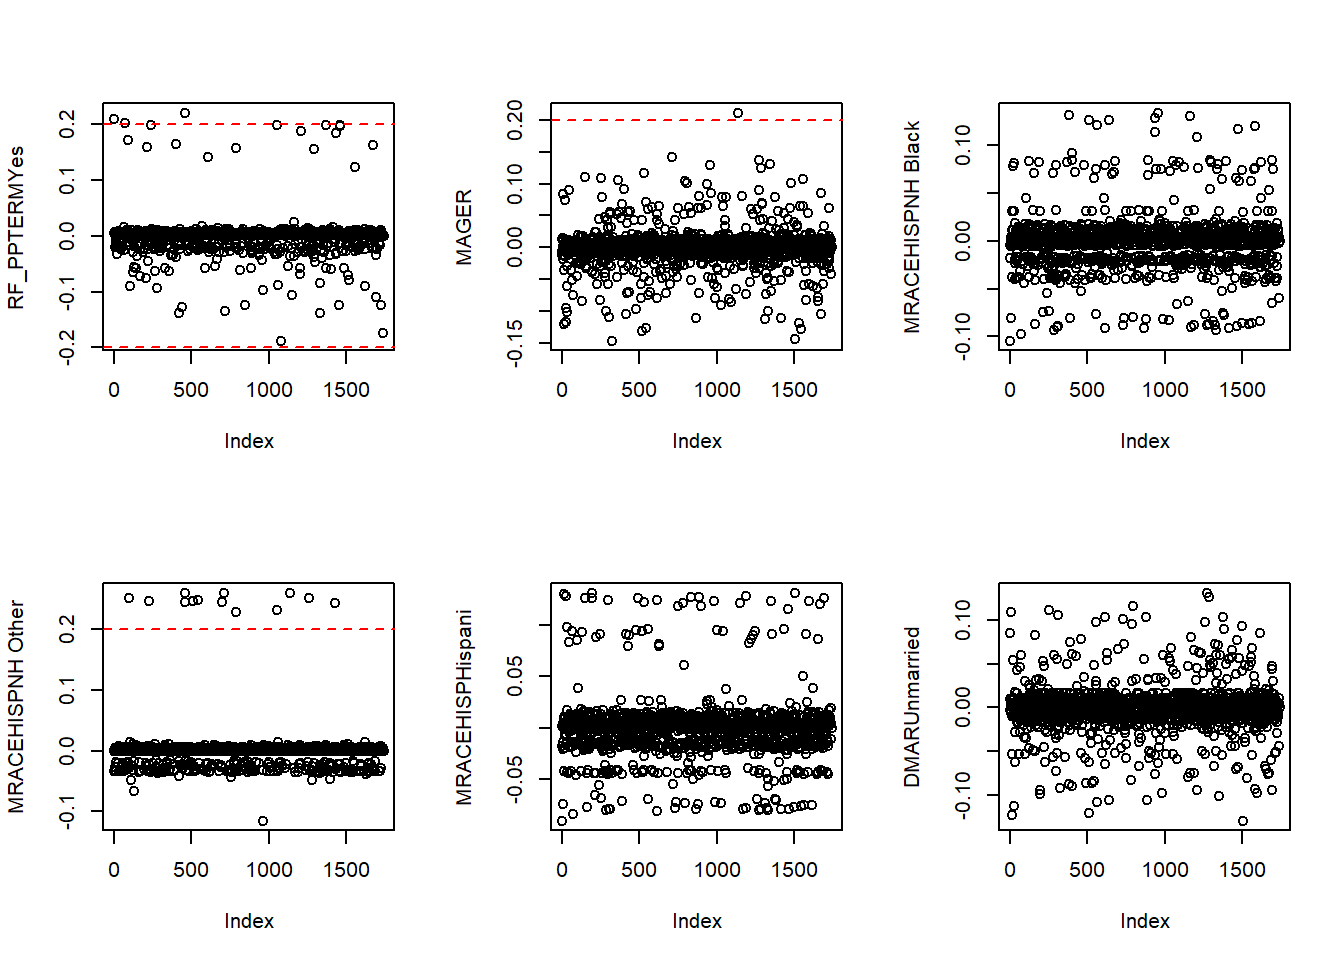 DFBetas from a Cox regression